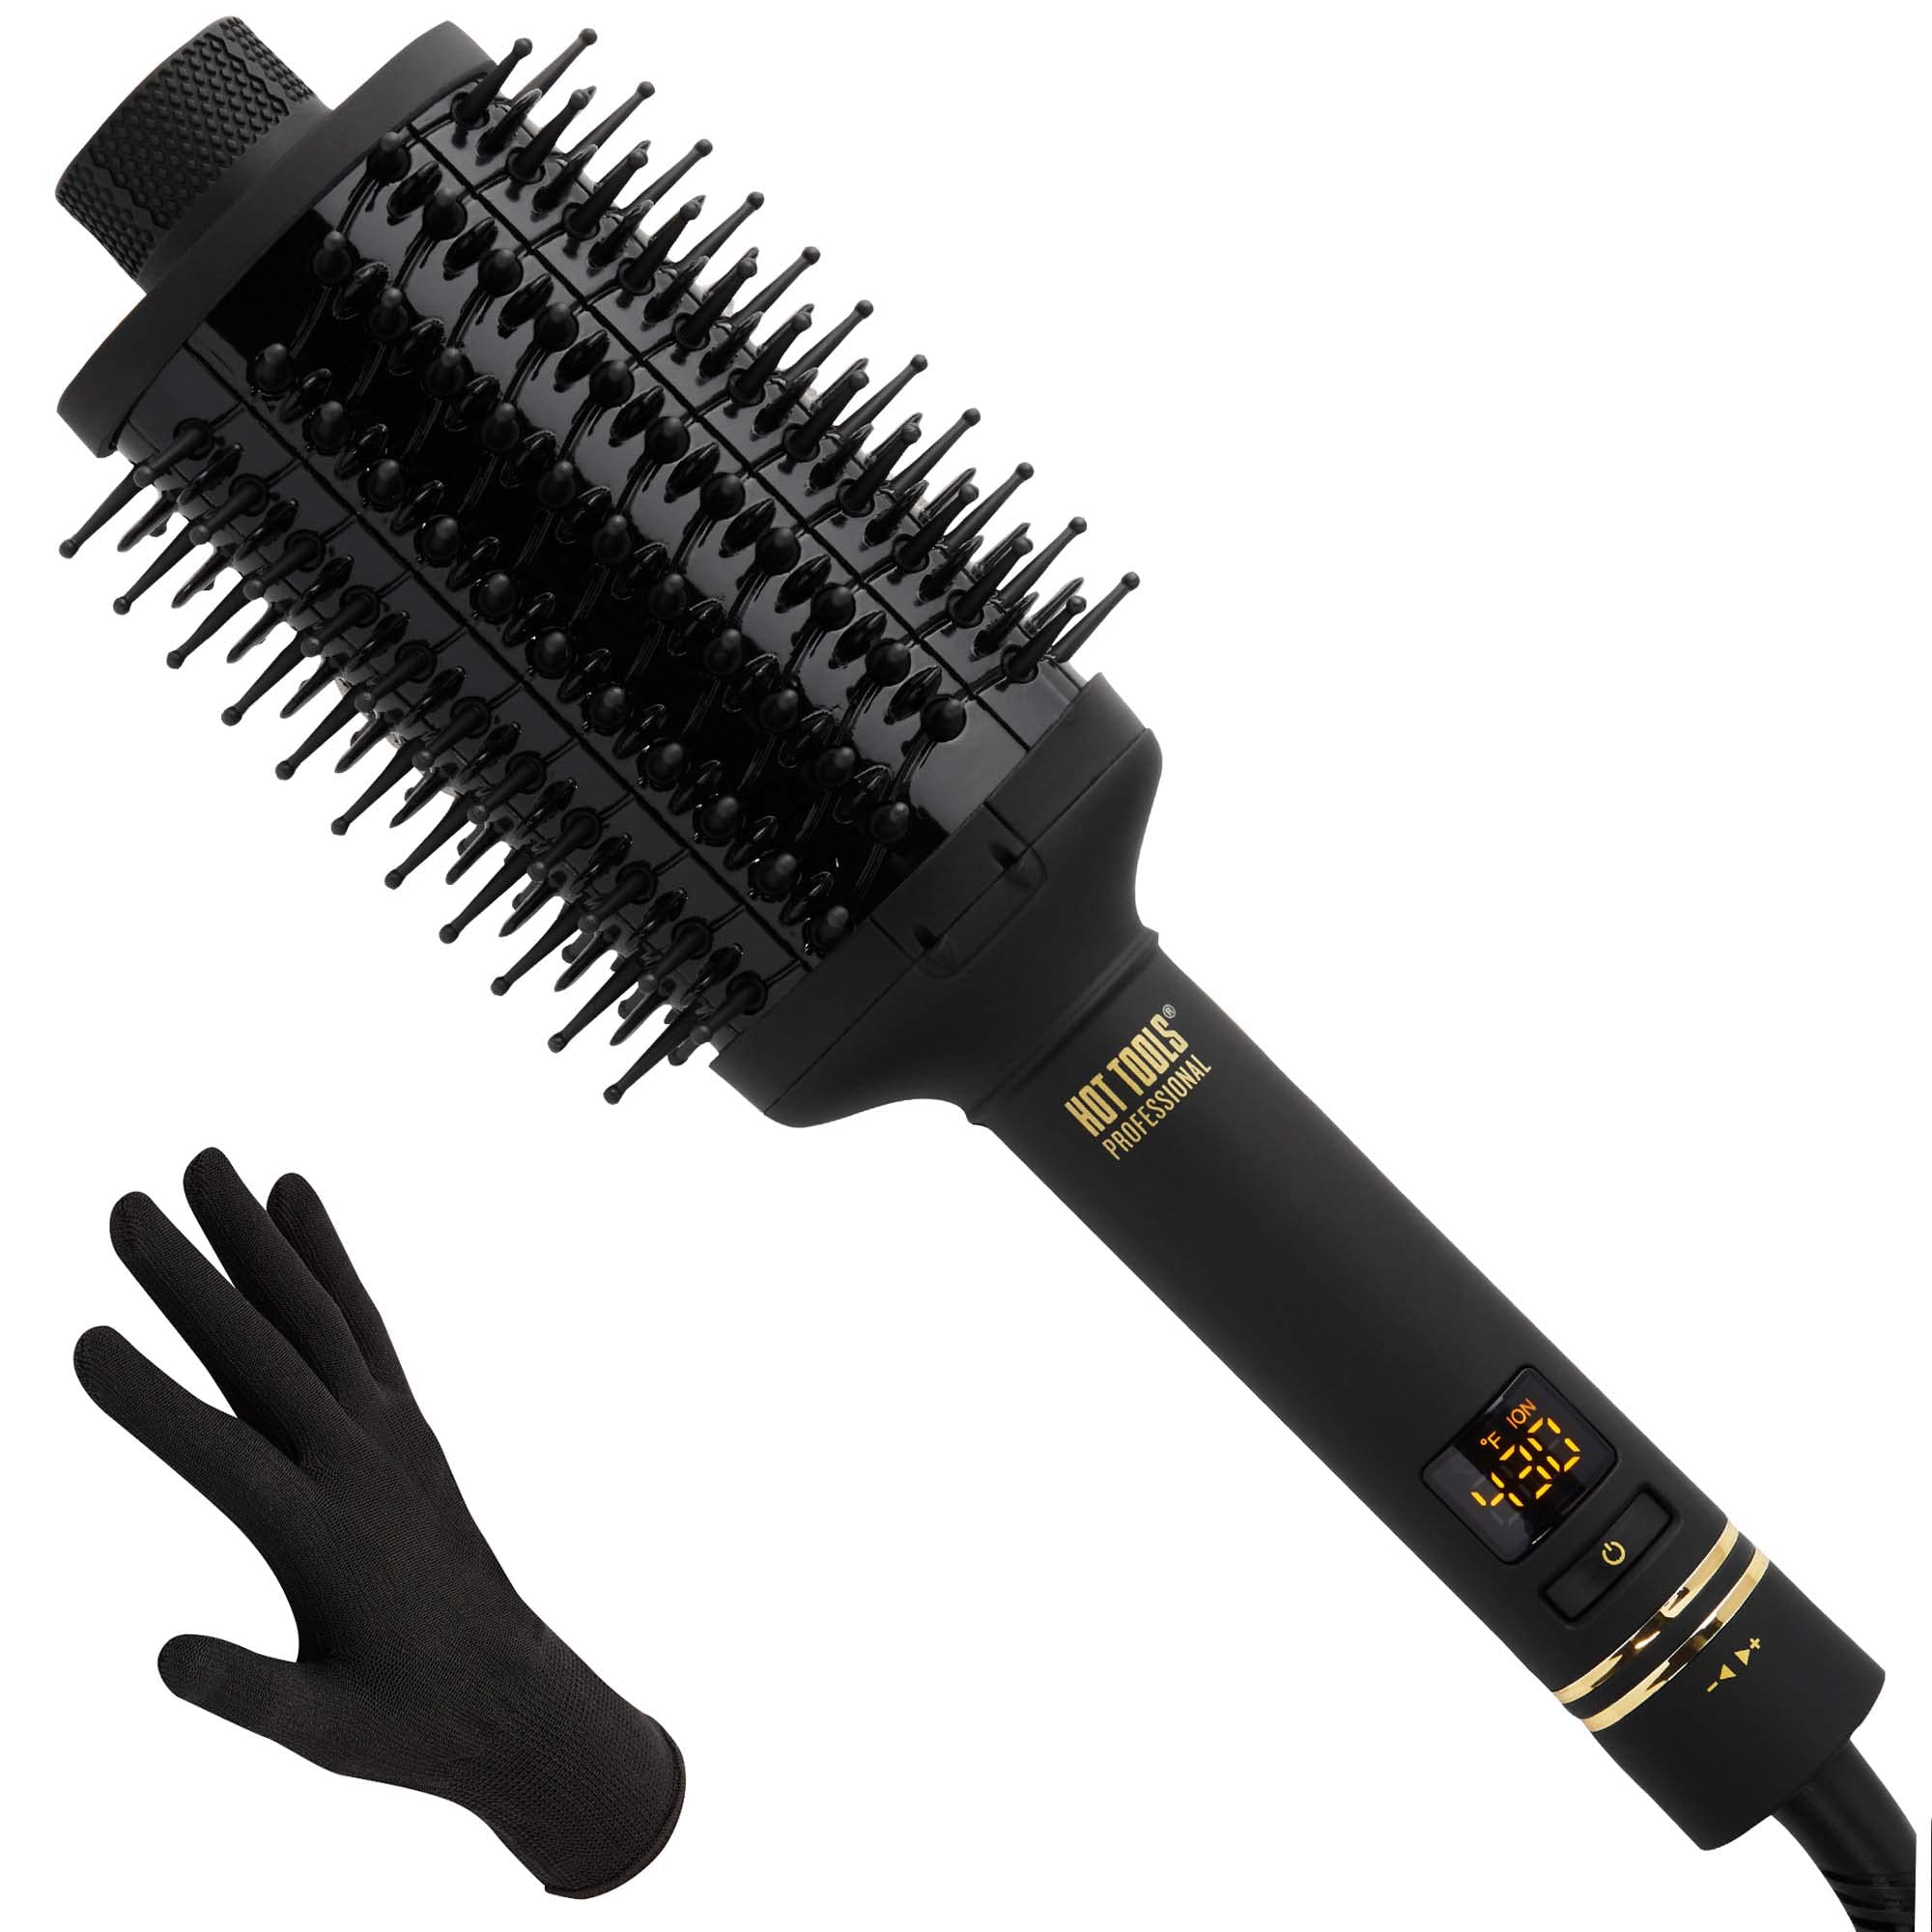 HOT TOOLS Pro Artist Heated Hair Styling Oval Brush, Black/Gold